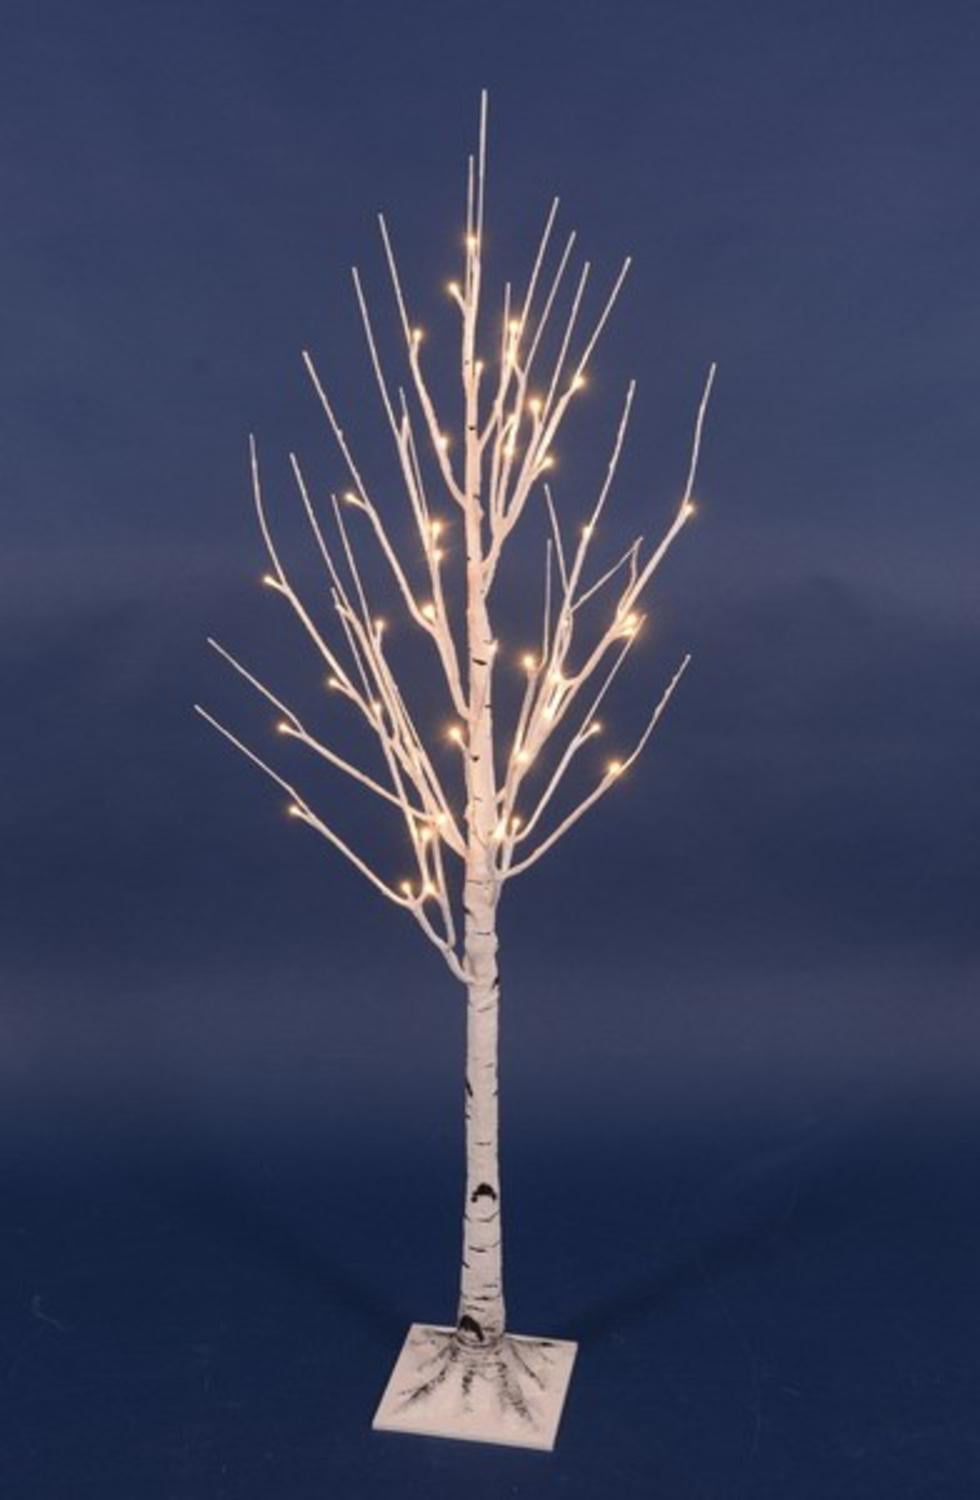 4 Pre Lit Warm White Led Lighted Christmas Twig White Birch Tree Outdoor Decoration